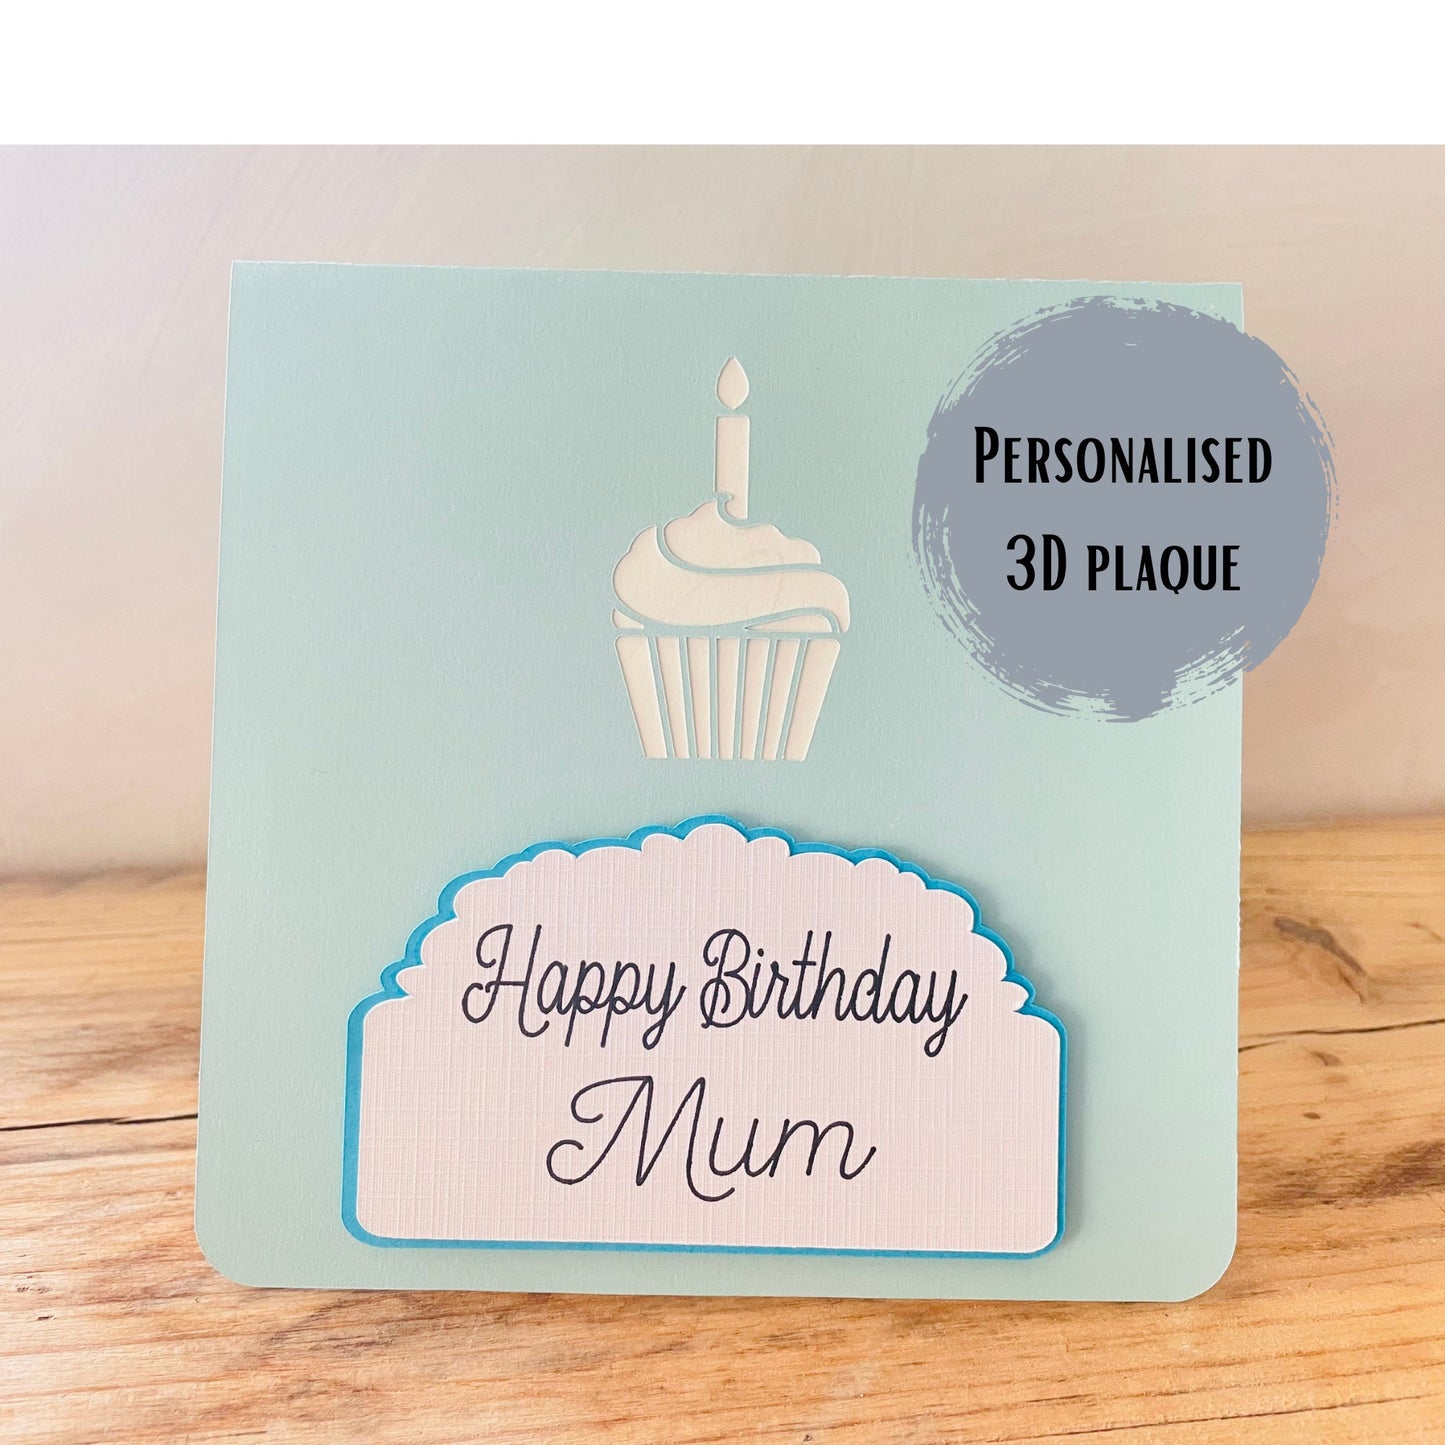 Personalised Pop-Up Cupcake Birthday Card, 3D Plaque Birthday Greetings Card with Name and Candle, Blank Card with Handmade Envelope